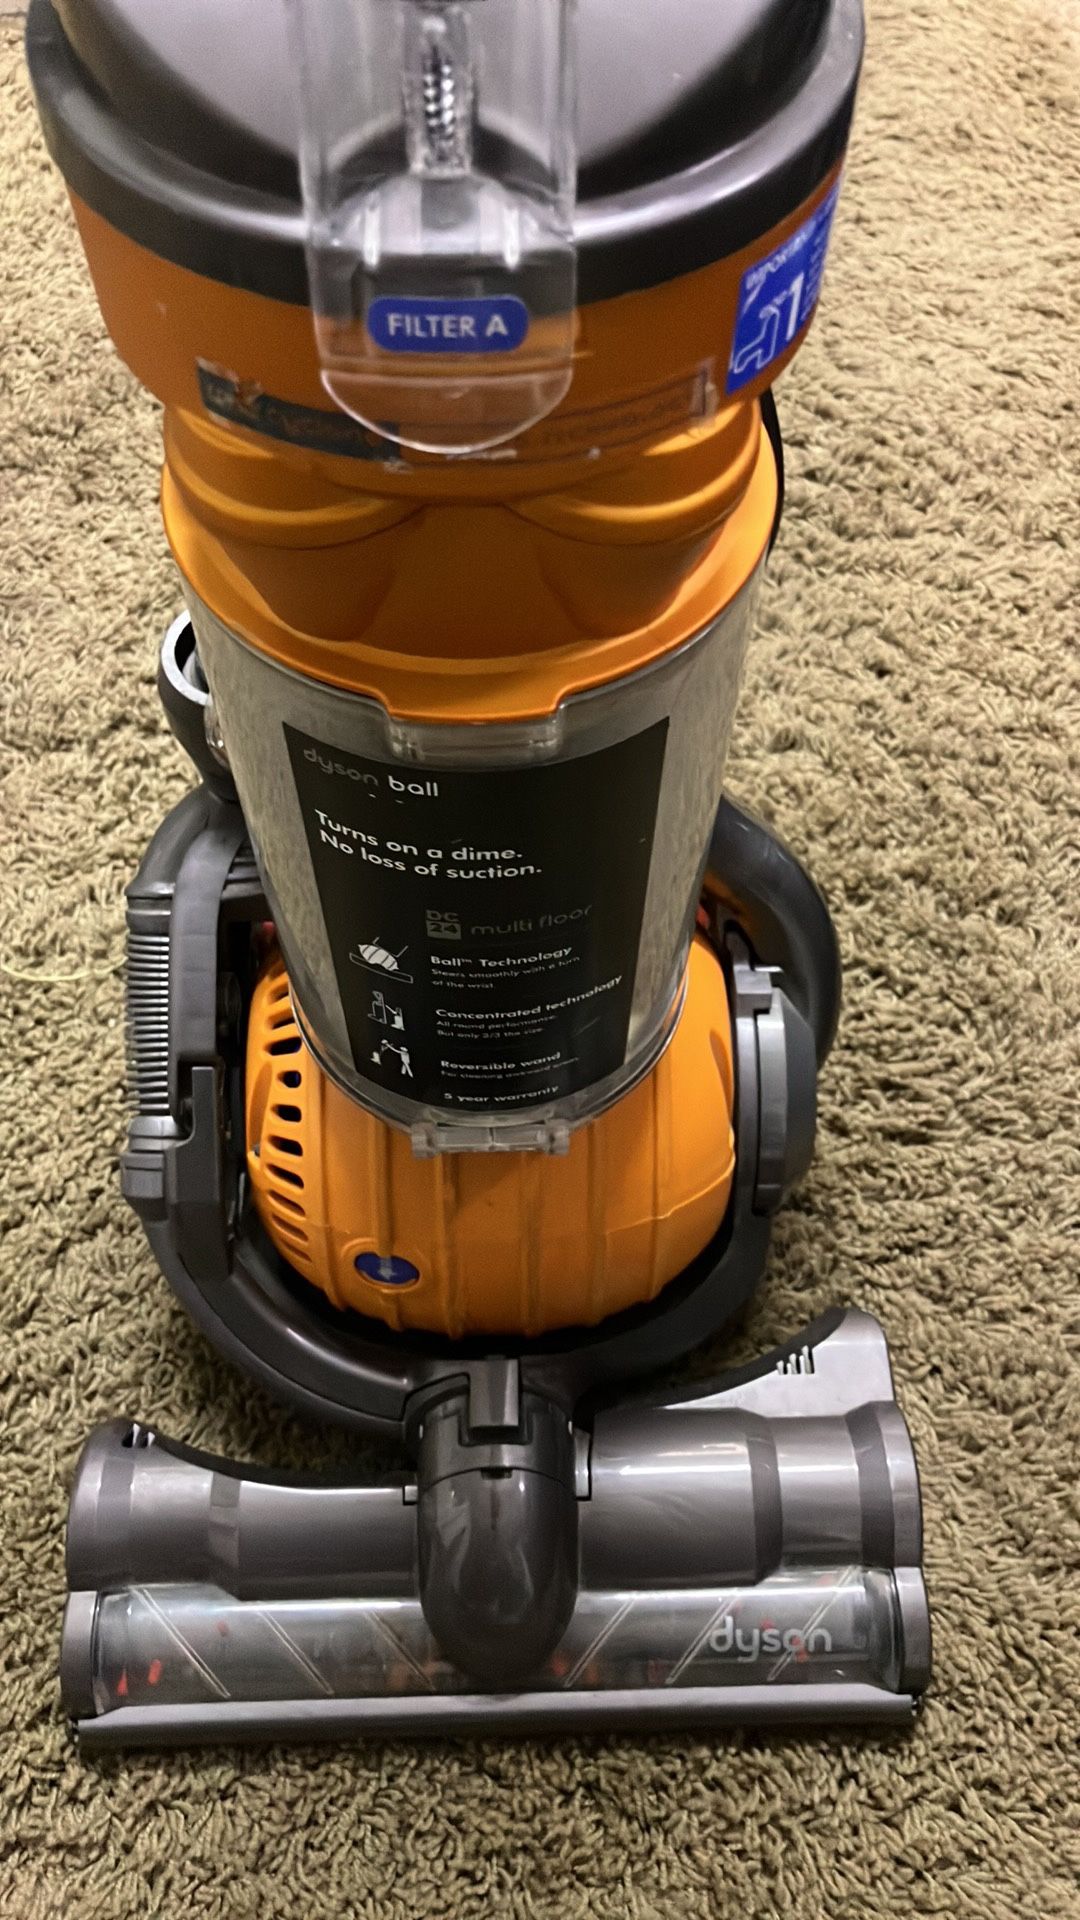 VACUUM DYSON WORKS GREAT 